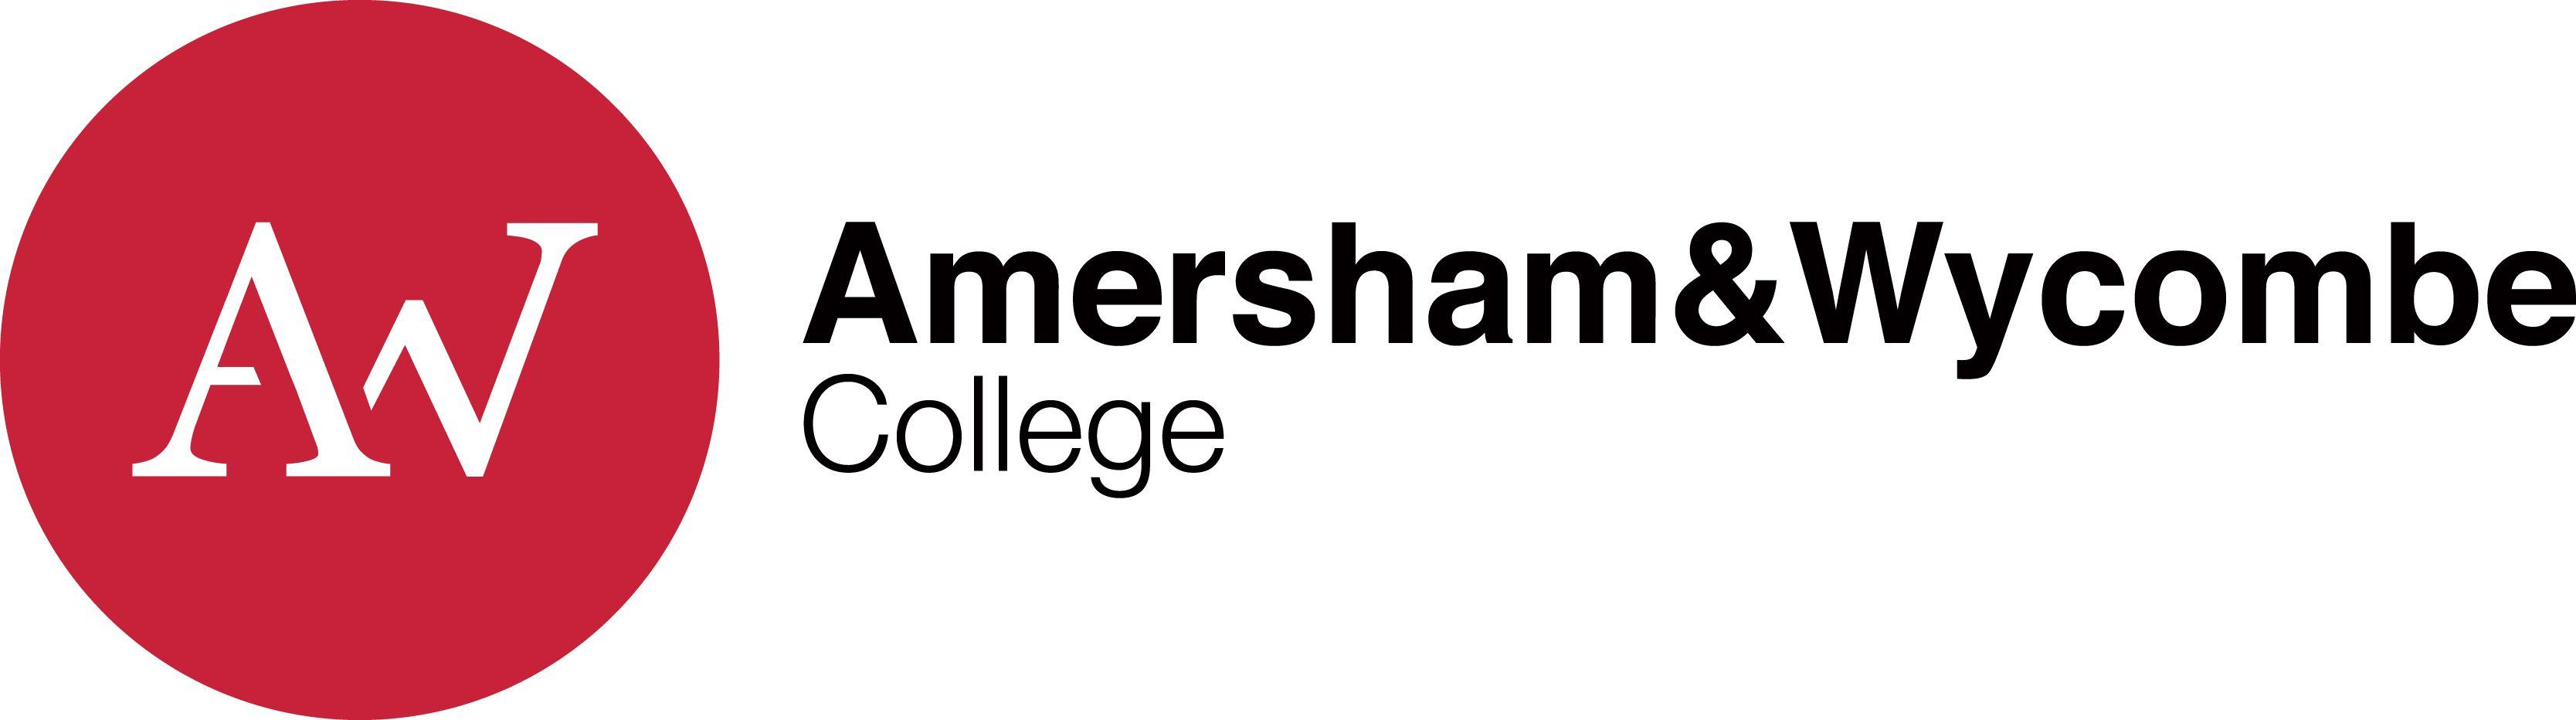 Red and Black College Logo - Amersham and Wycombe College Gain Plaudits for Use of Labour Market